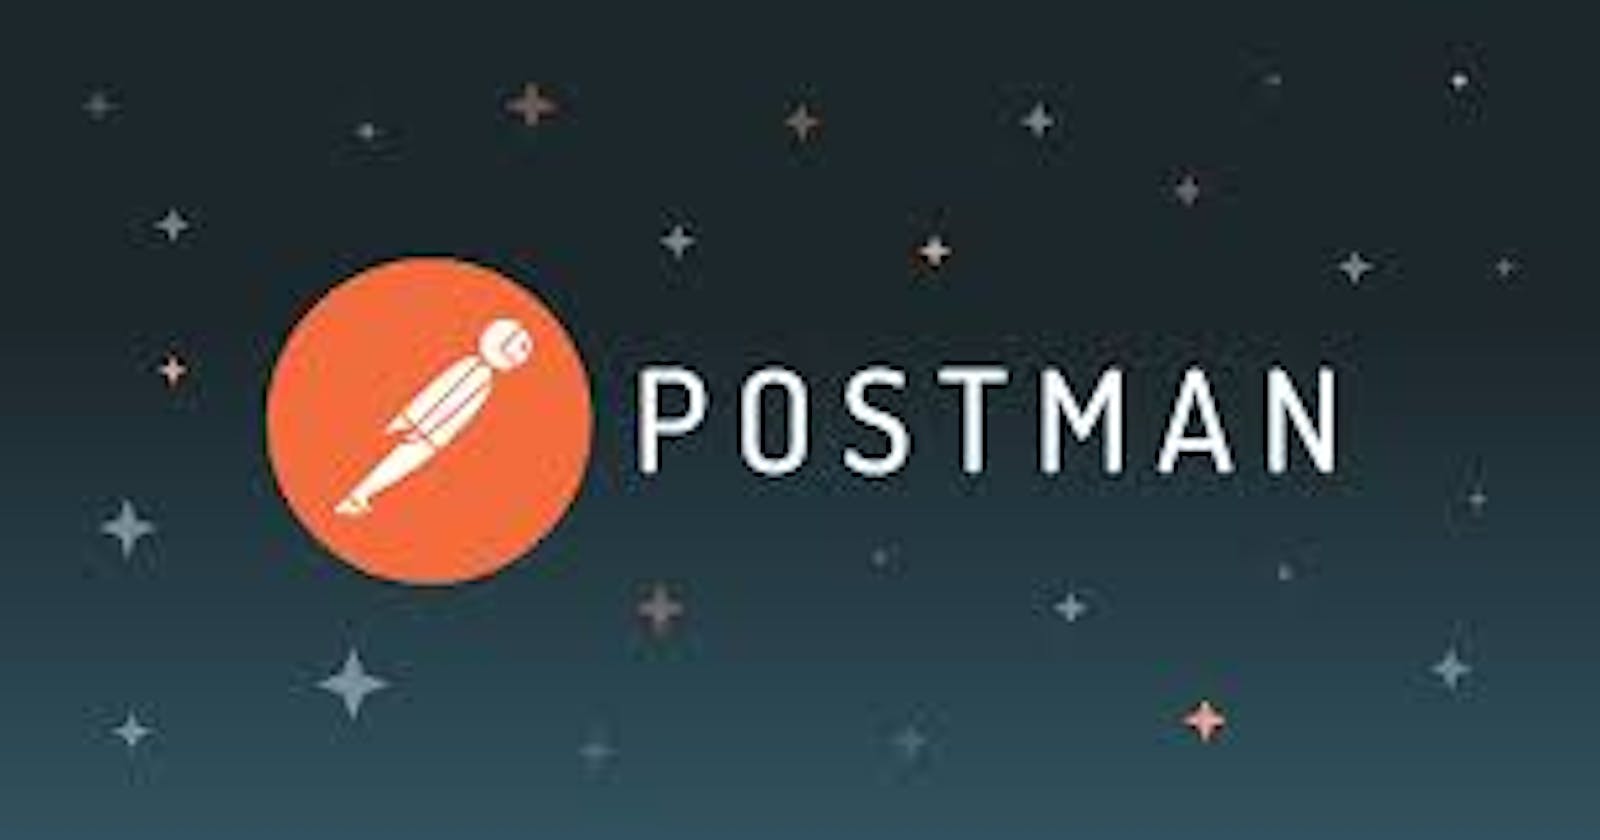 Learning About APIs and Postman: My experience at API101 by Yash Katyan and Maharishi Sinha